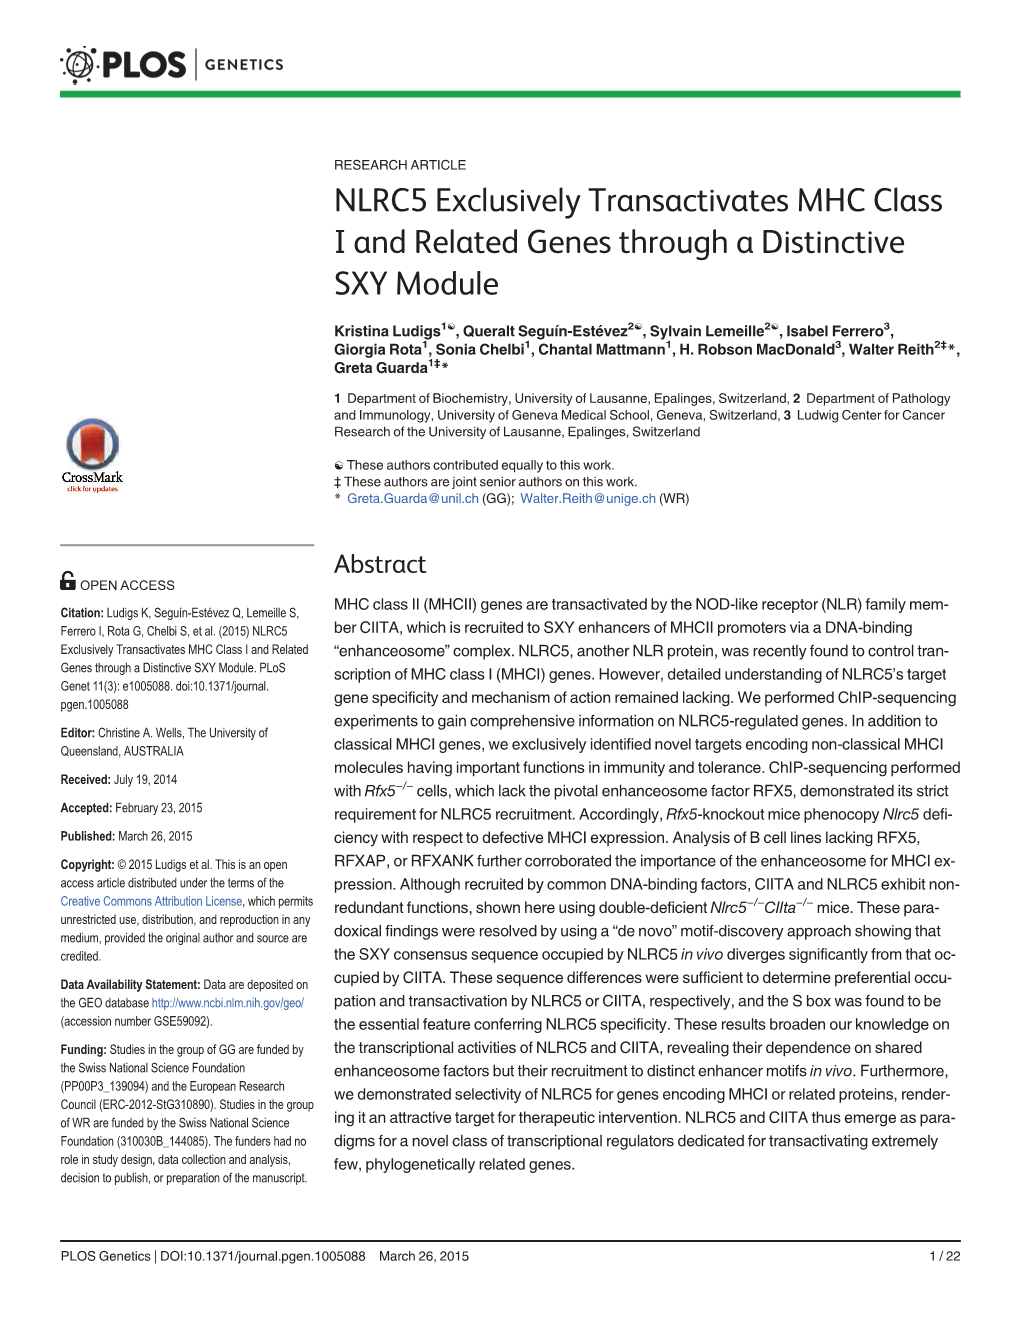 NLRC5 Exclusively Transactivates MHC Class I and Related Genes Through a Distinctive SXY Module